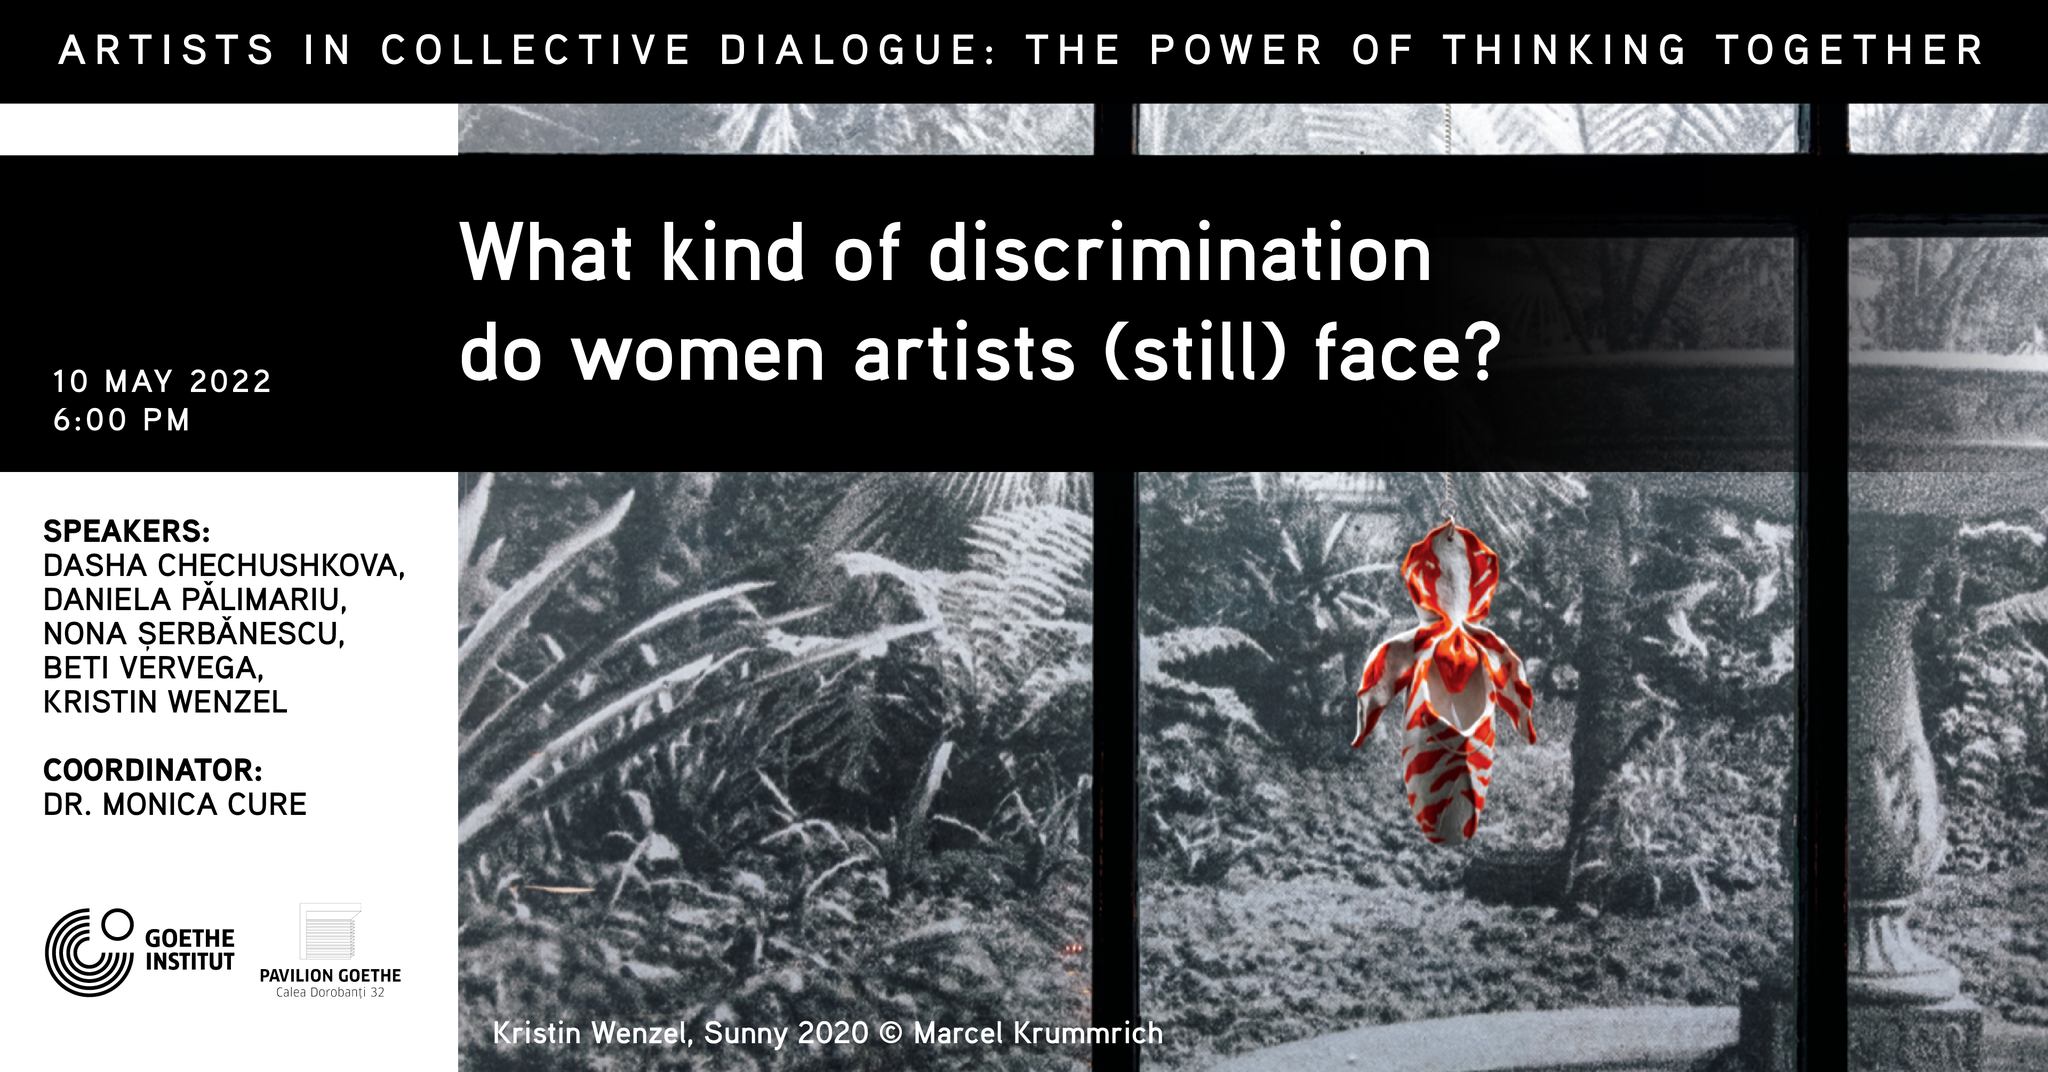 Artists in Collective Dialogue: What kind of discrimination do women artists (still) face?